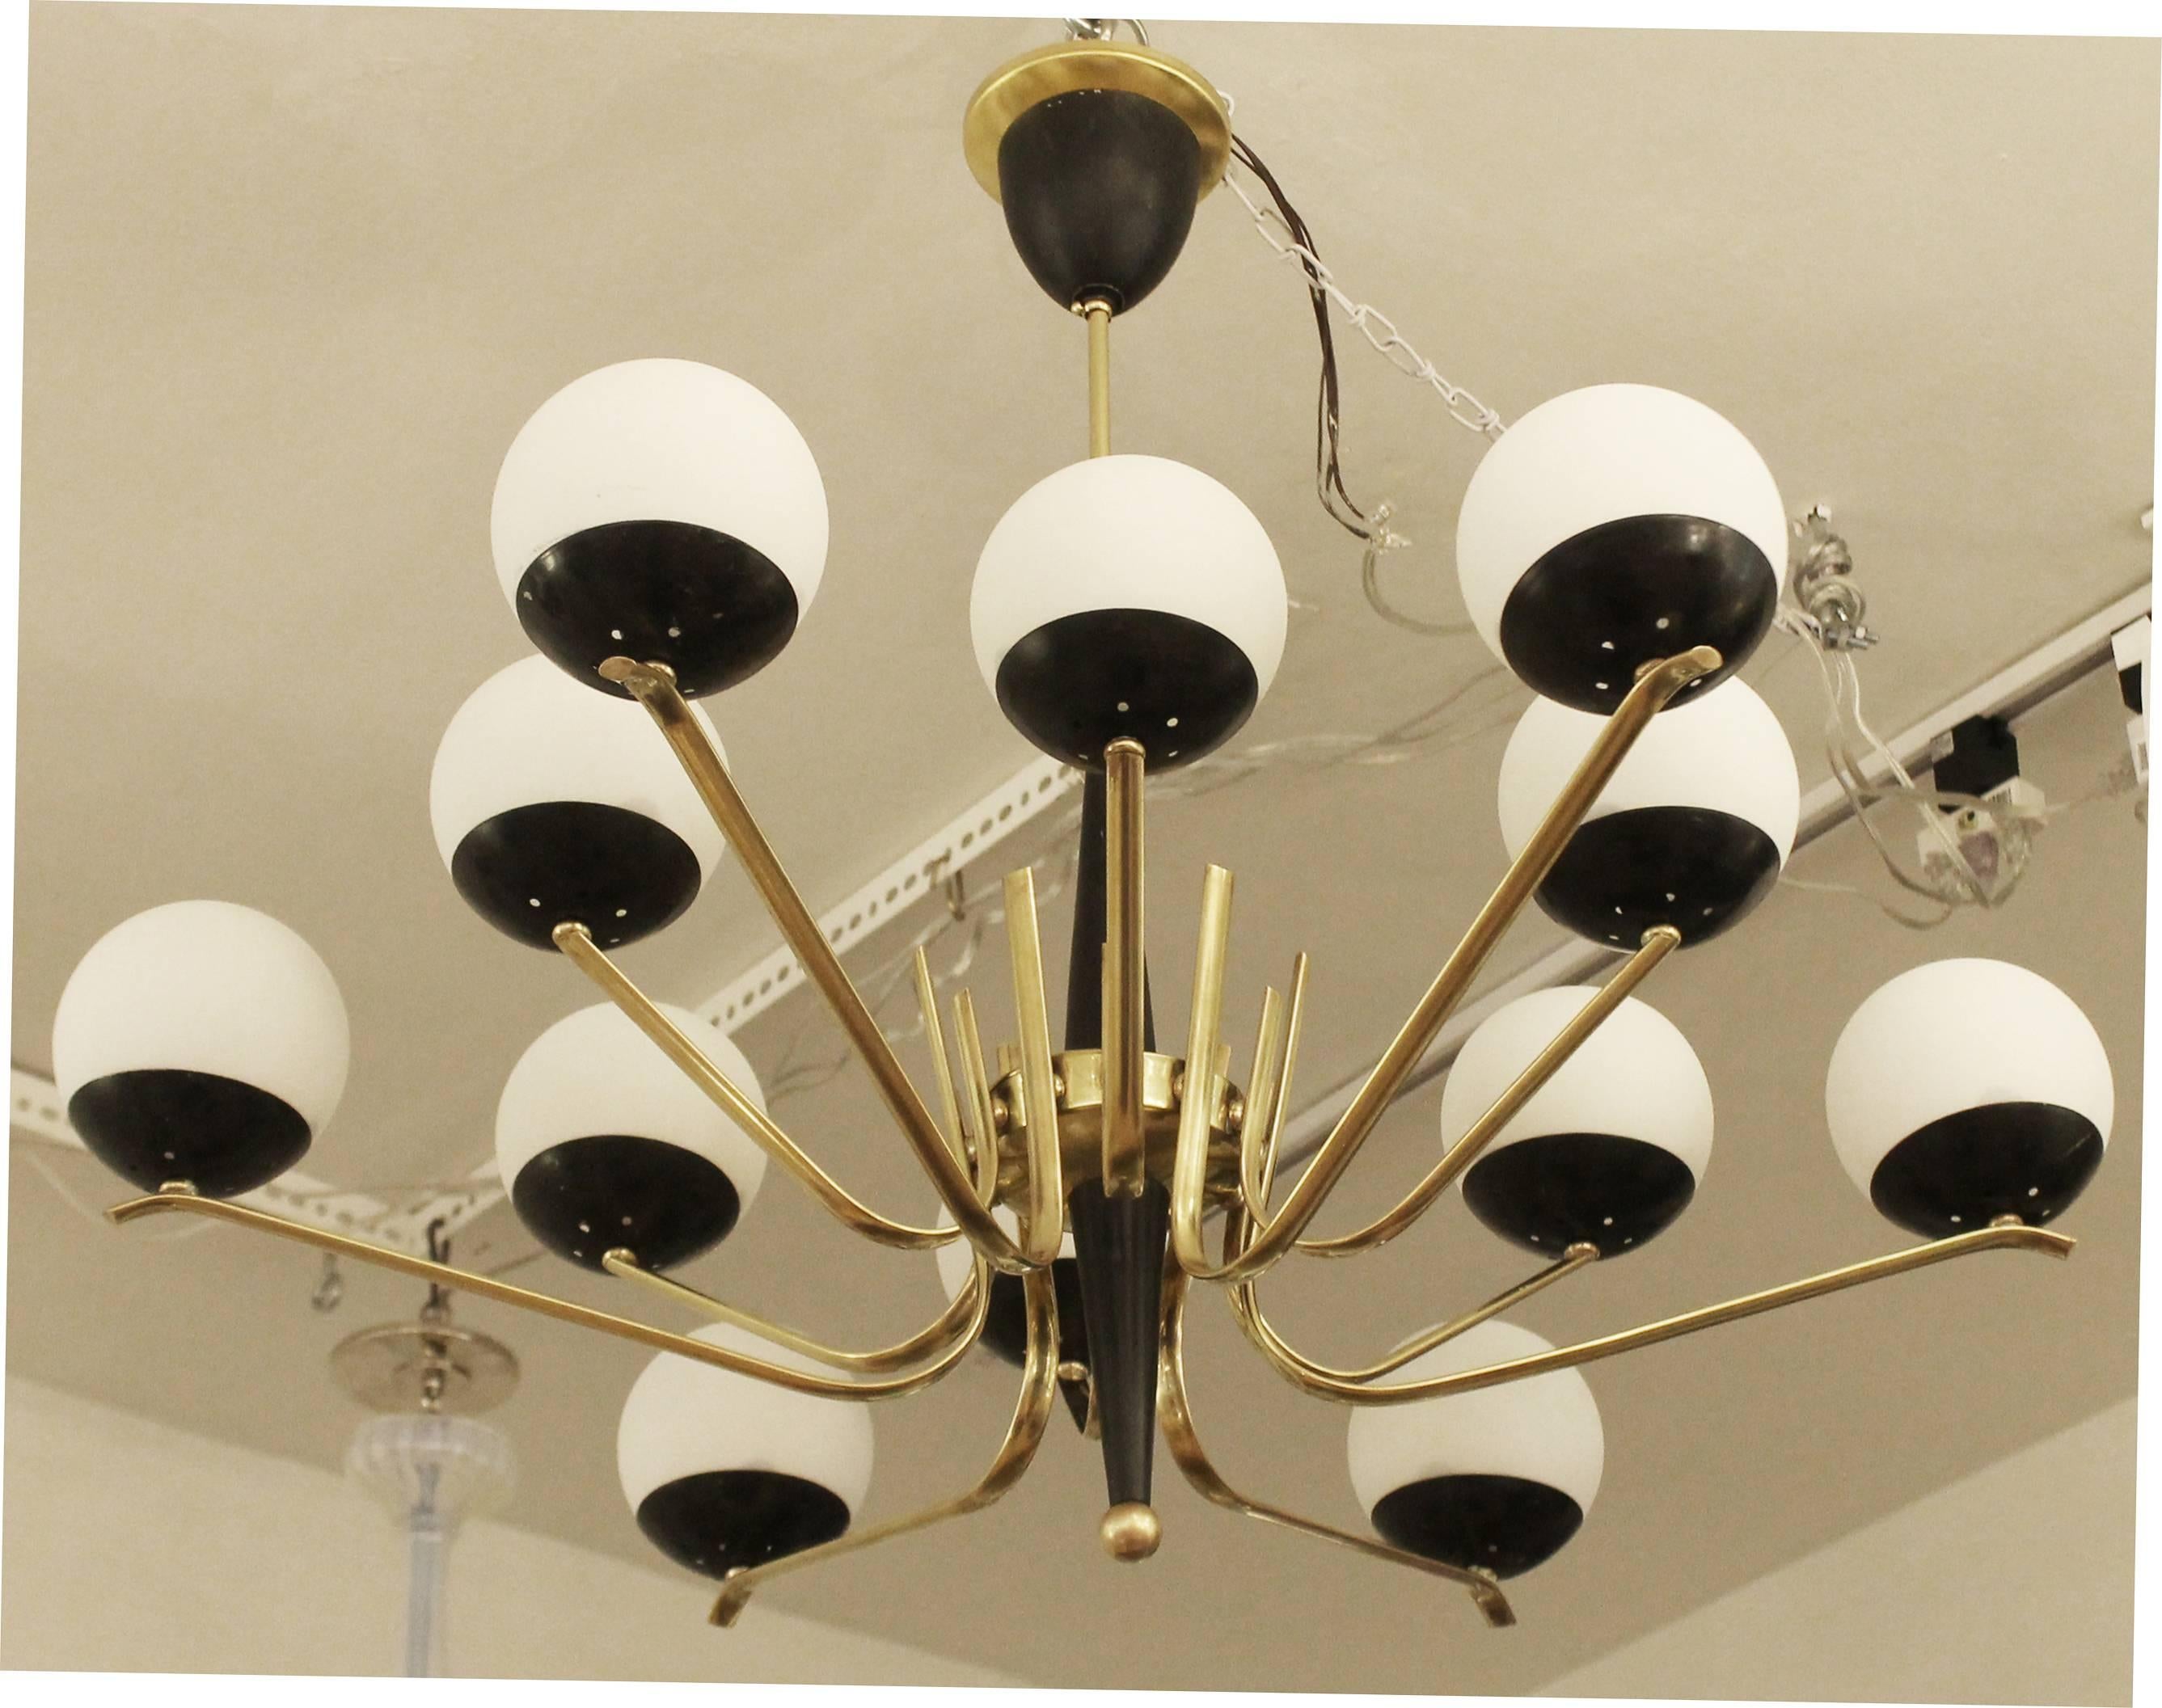 Impressive Stilnovo style chandelier featuring 12 alternating long and short brass arms. Each arm holds a black cup with a white frosted glass shade. Height of stem can be adjusted upon request. Holds 12 candelabra sockets.

For best pricing